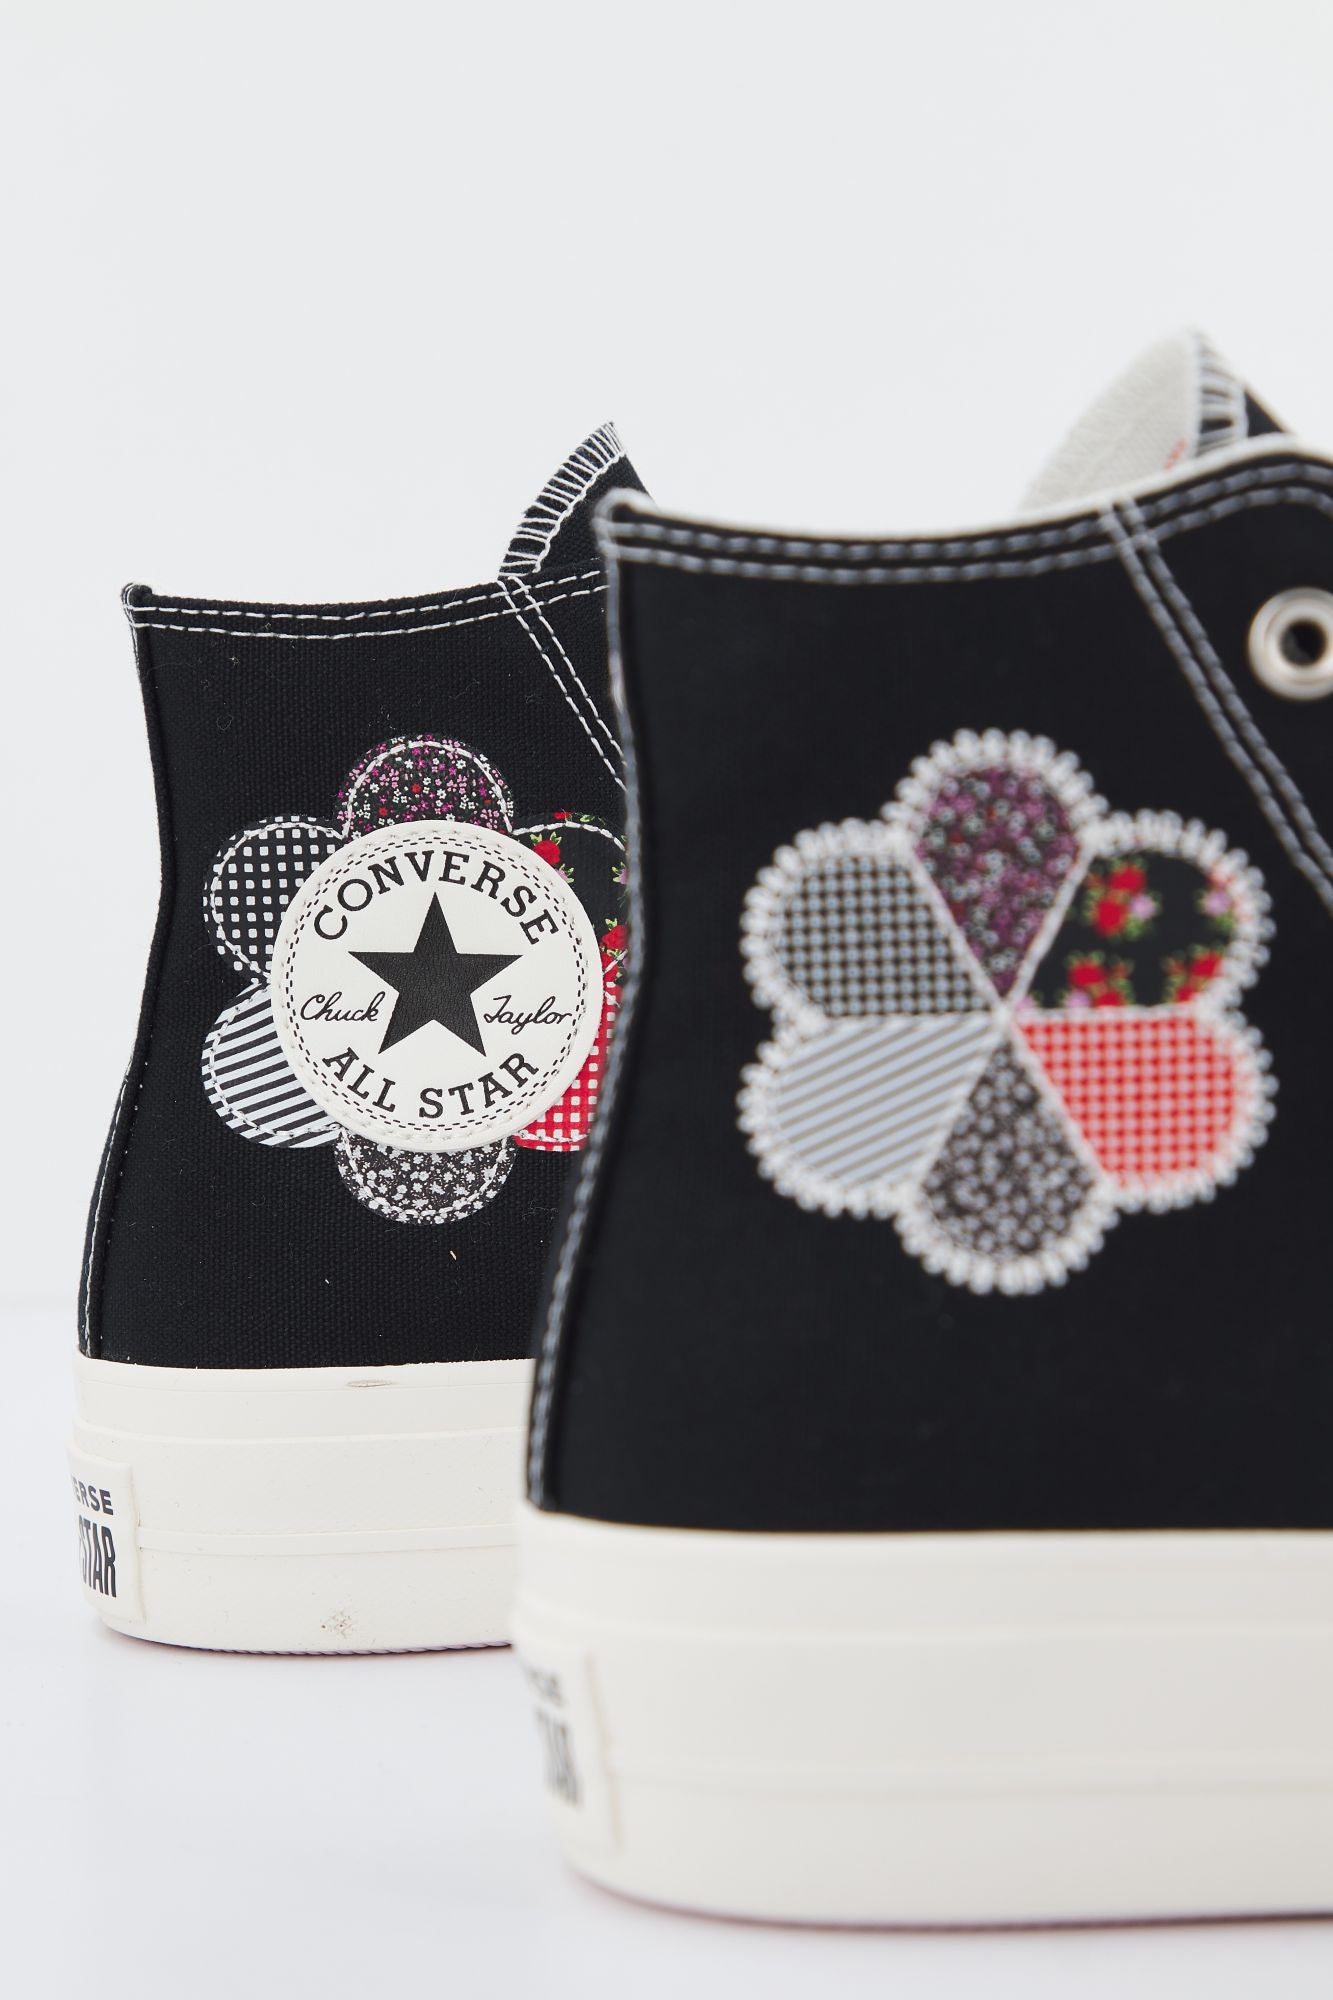 CONVERSE CHUCK TAYLOR ALL STAR LIFT PLATFORM CRAFTED PATCHWORK en color NEGRO (3)